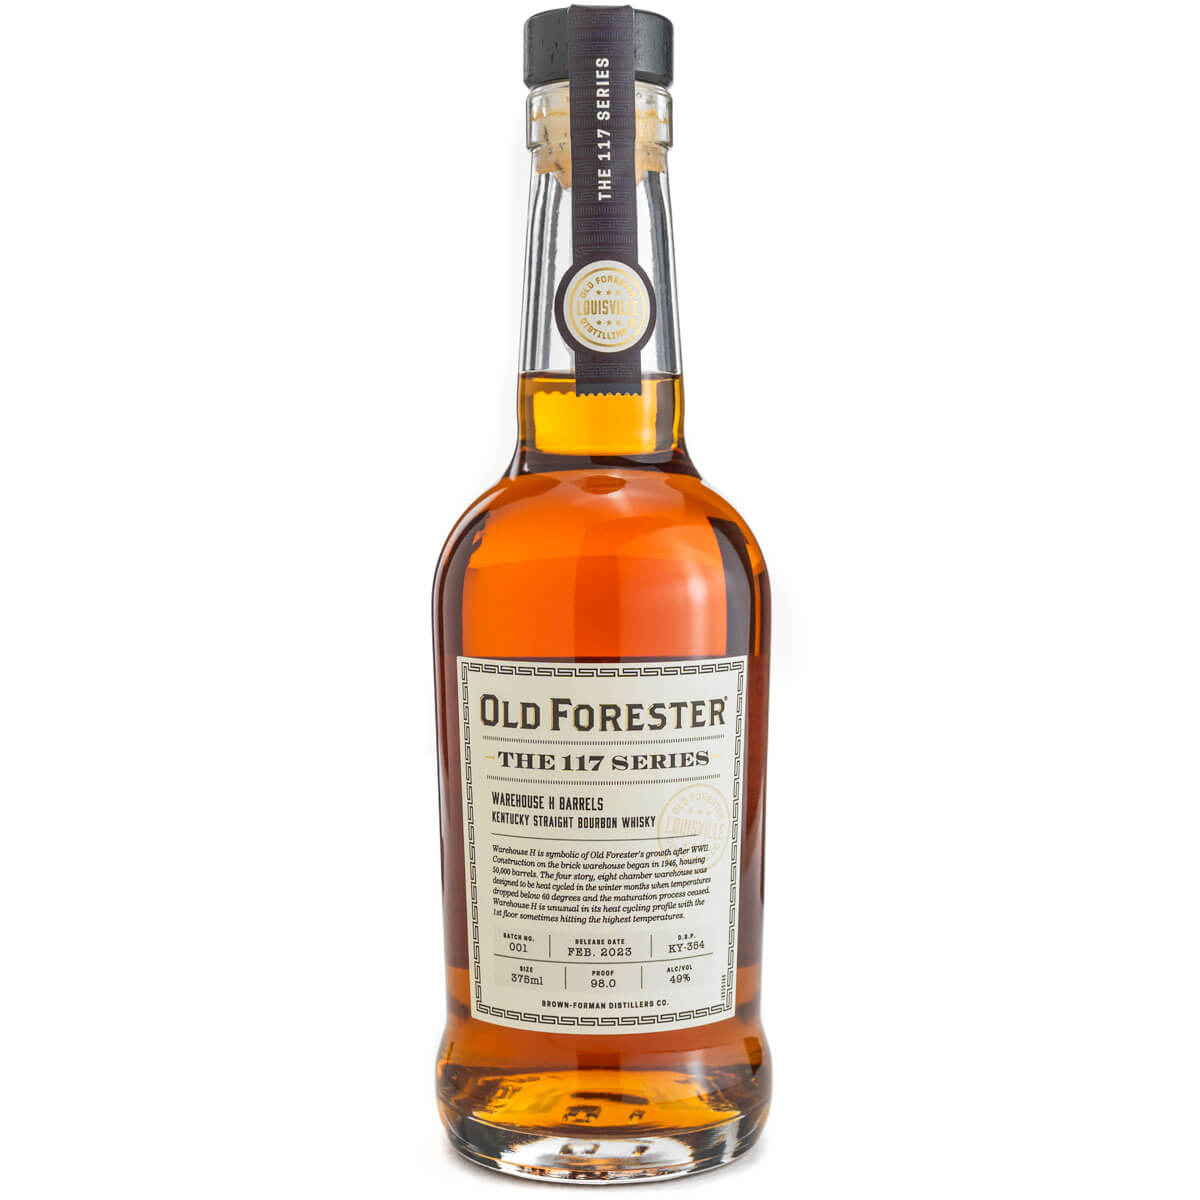 Old Forester The 117 Series bottle